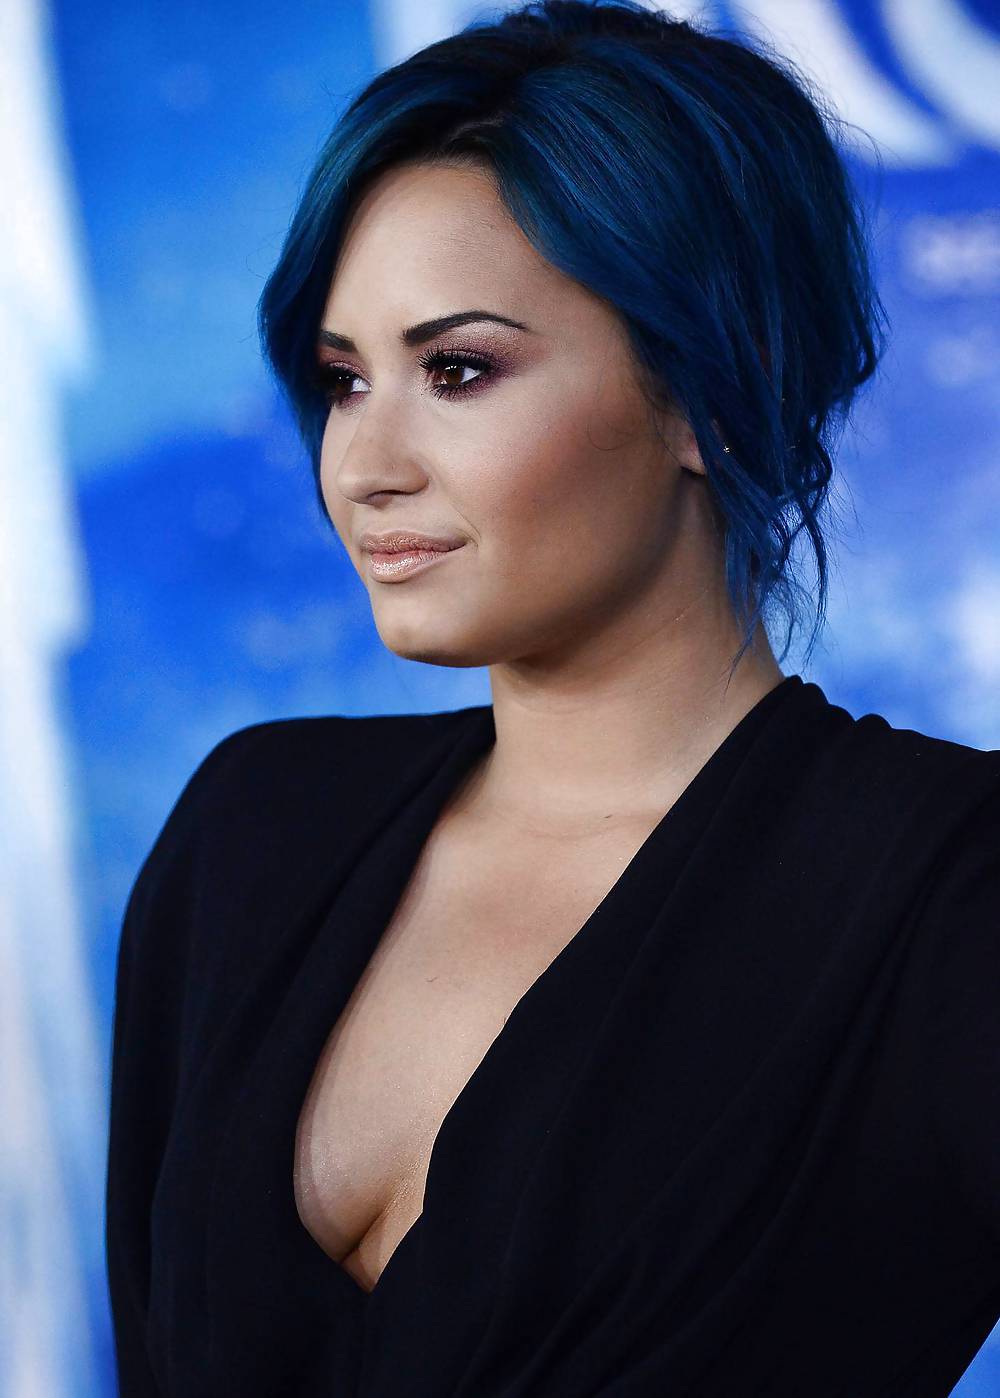 Demi Lovato with blue hair and business style #22180091